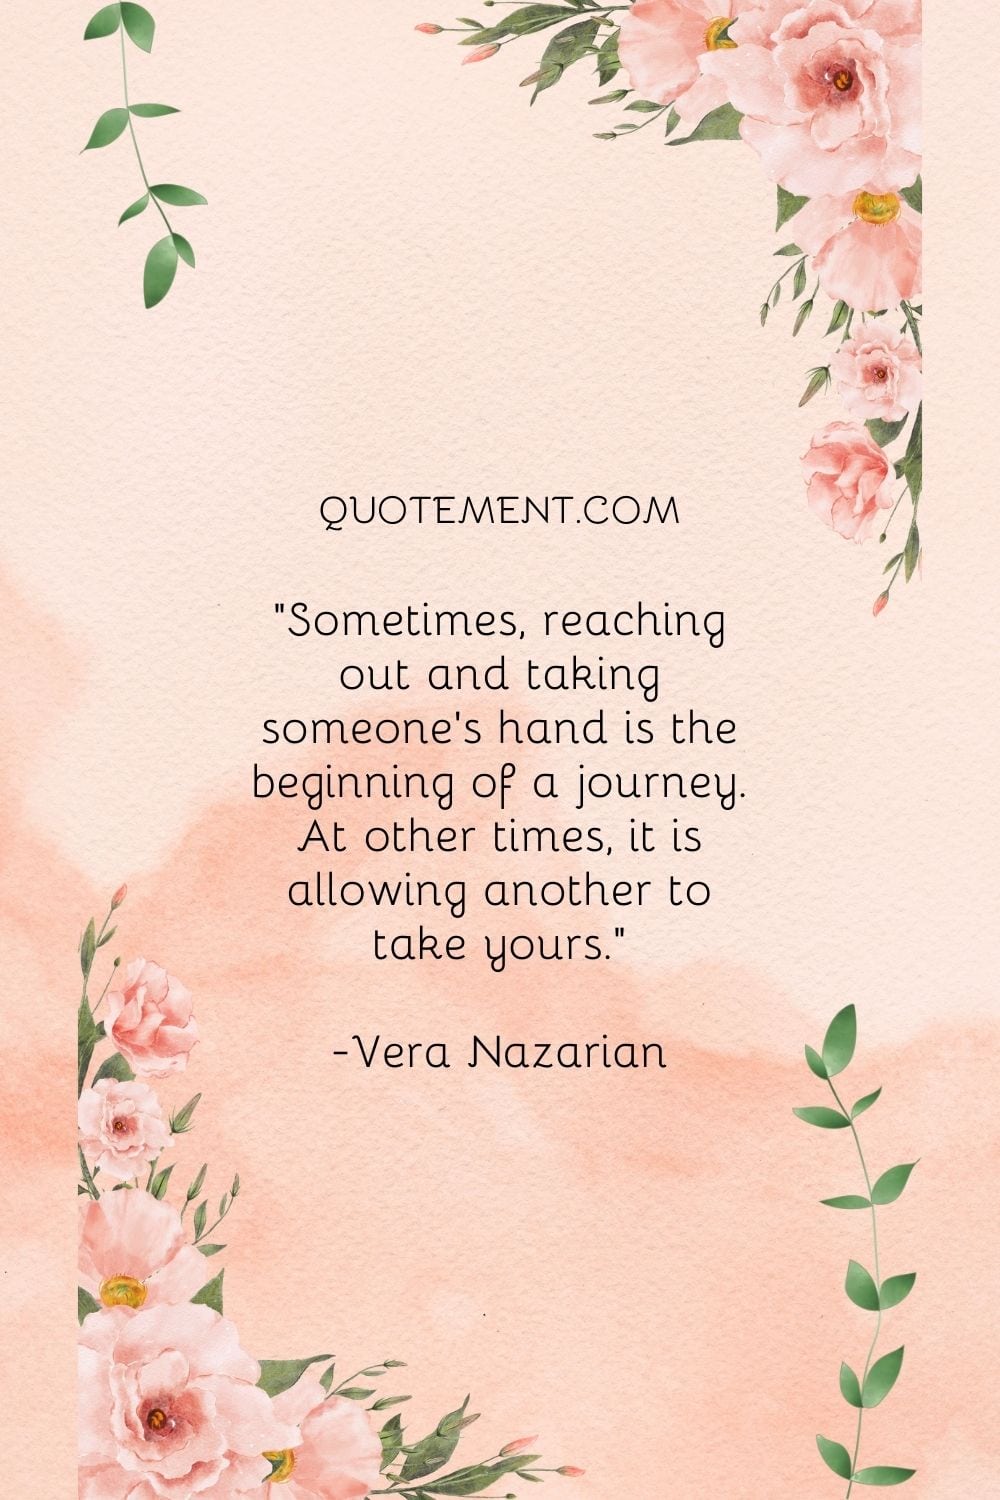 Sometimes, reaching out and taking someone's hand is the beginning of a journey.